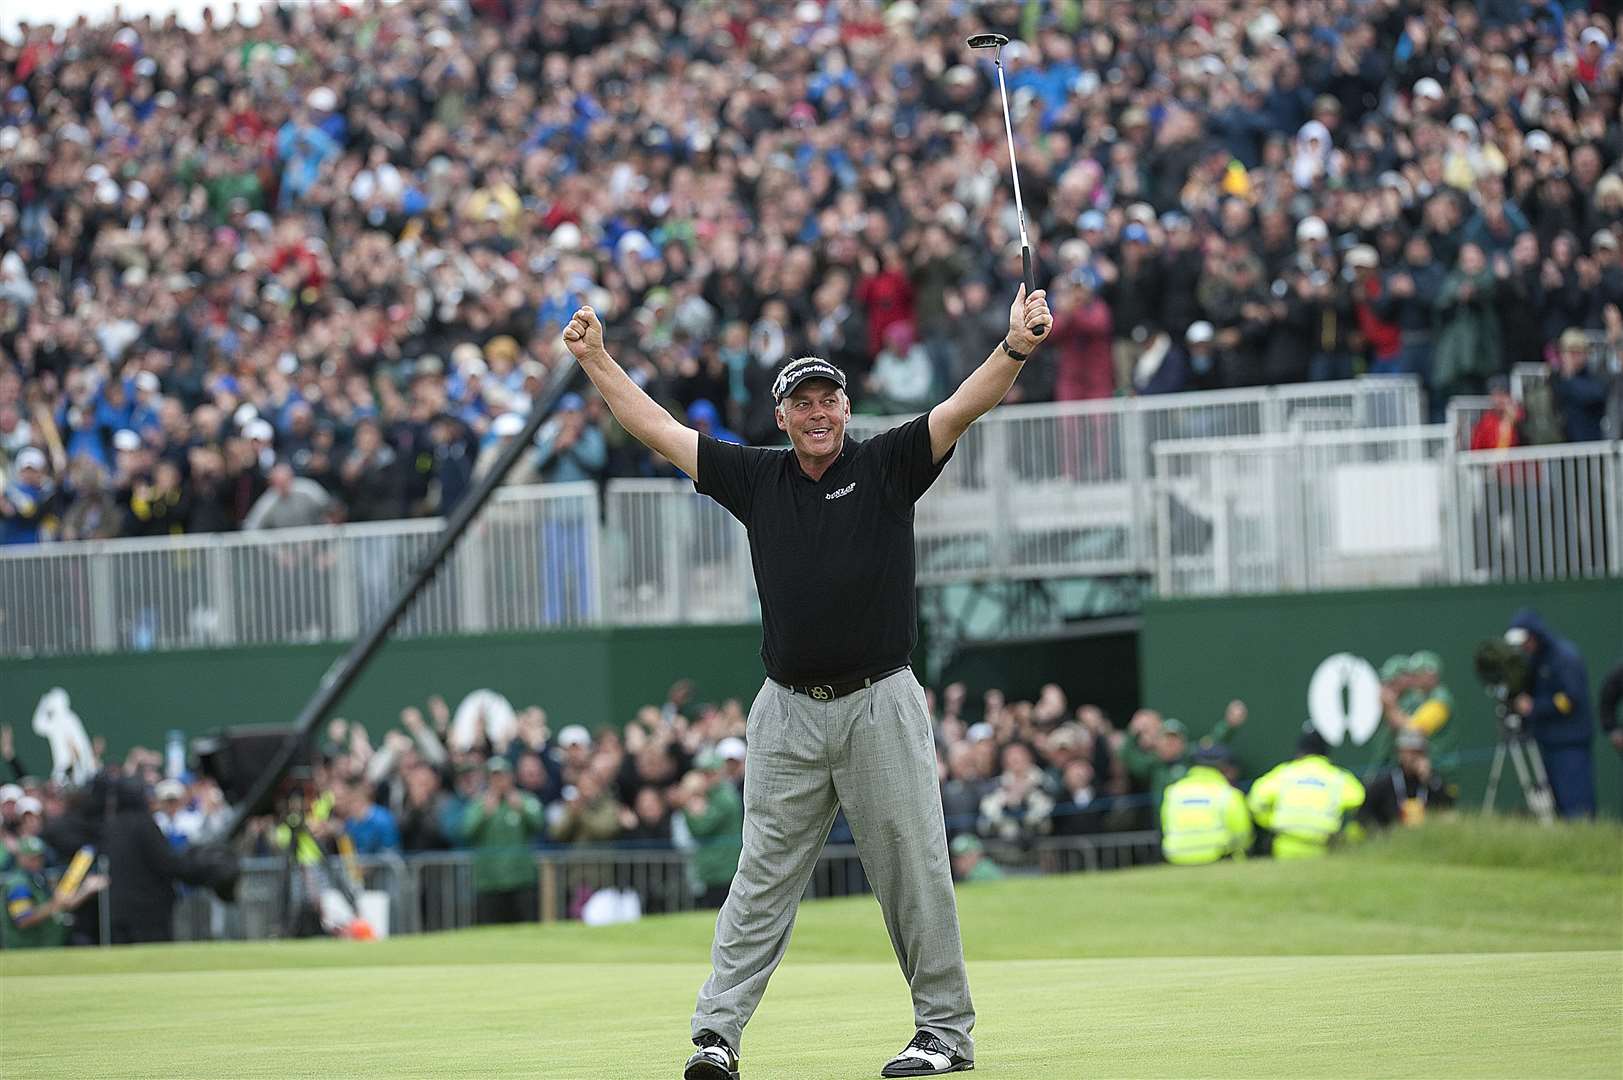 Darren Clarke celebrates winning The Open in 2011 at Royal St George's in front of a packed gallery. Picture: Barry Goodwin